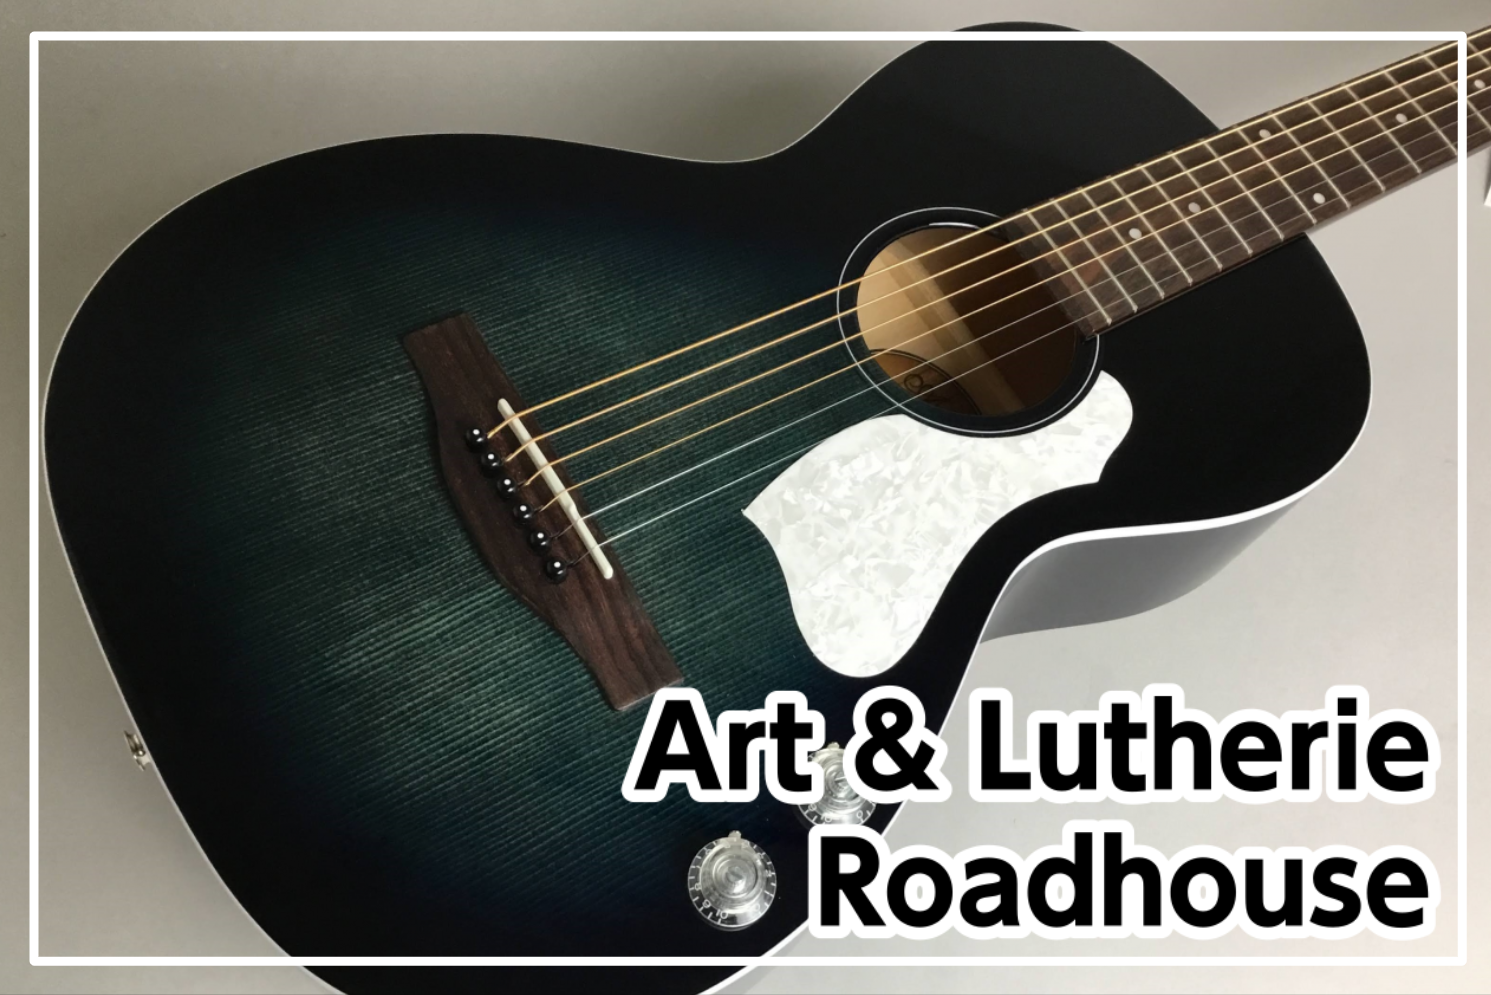 Art & Lutherie Roadhouse入荷！　(アート＆ルシアー ロードハウス)